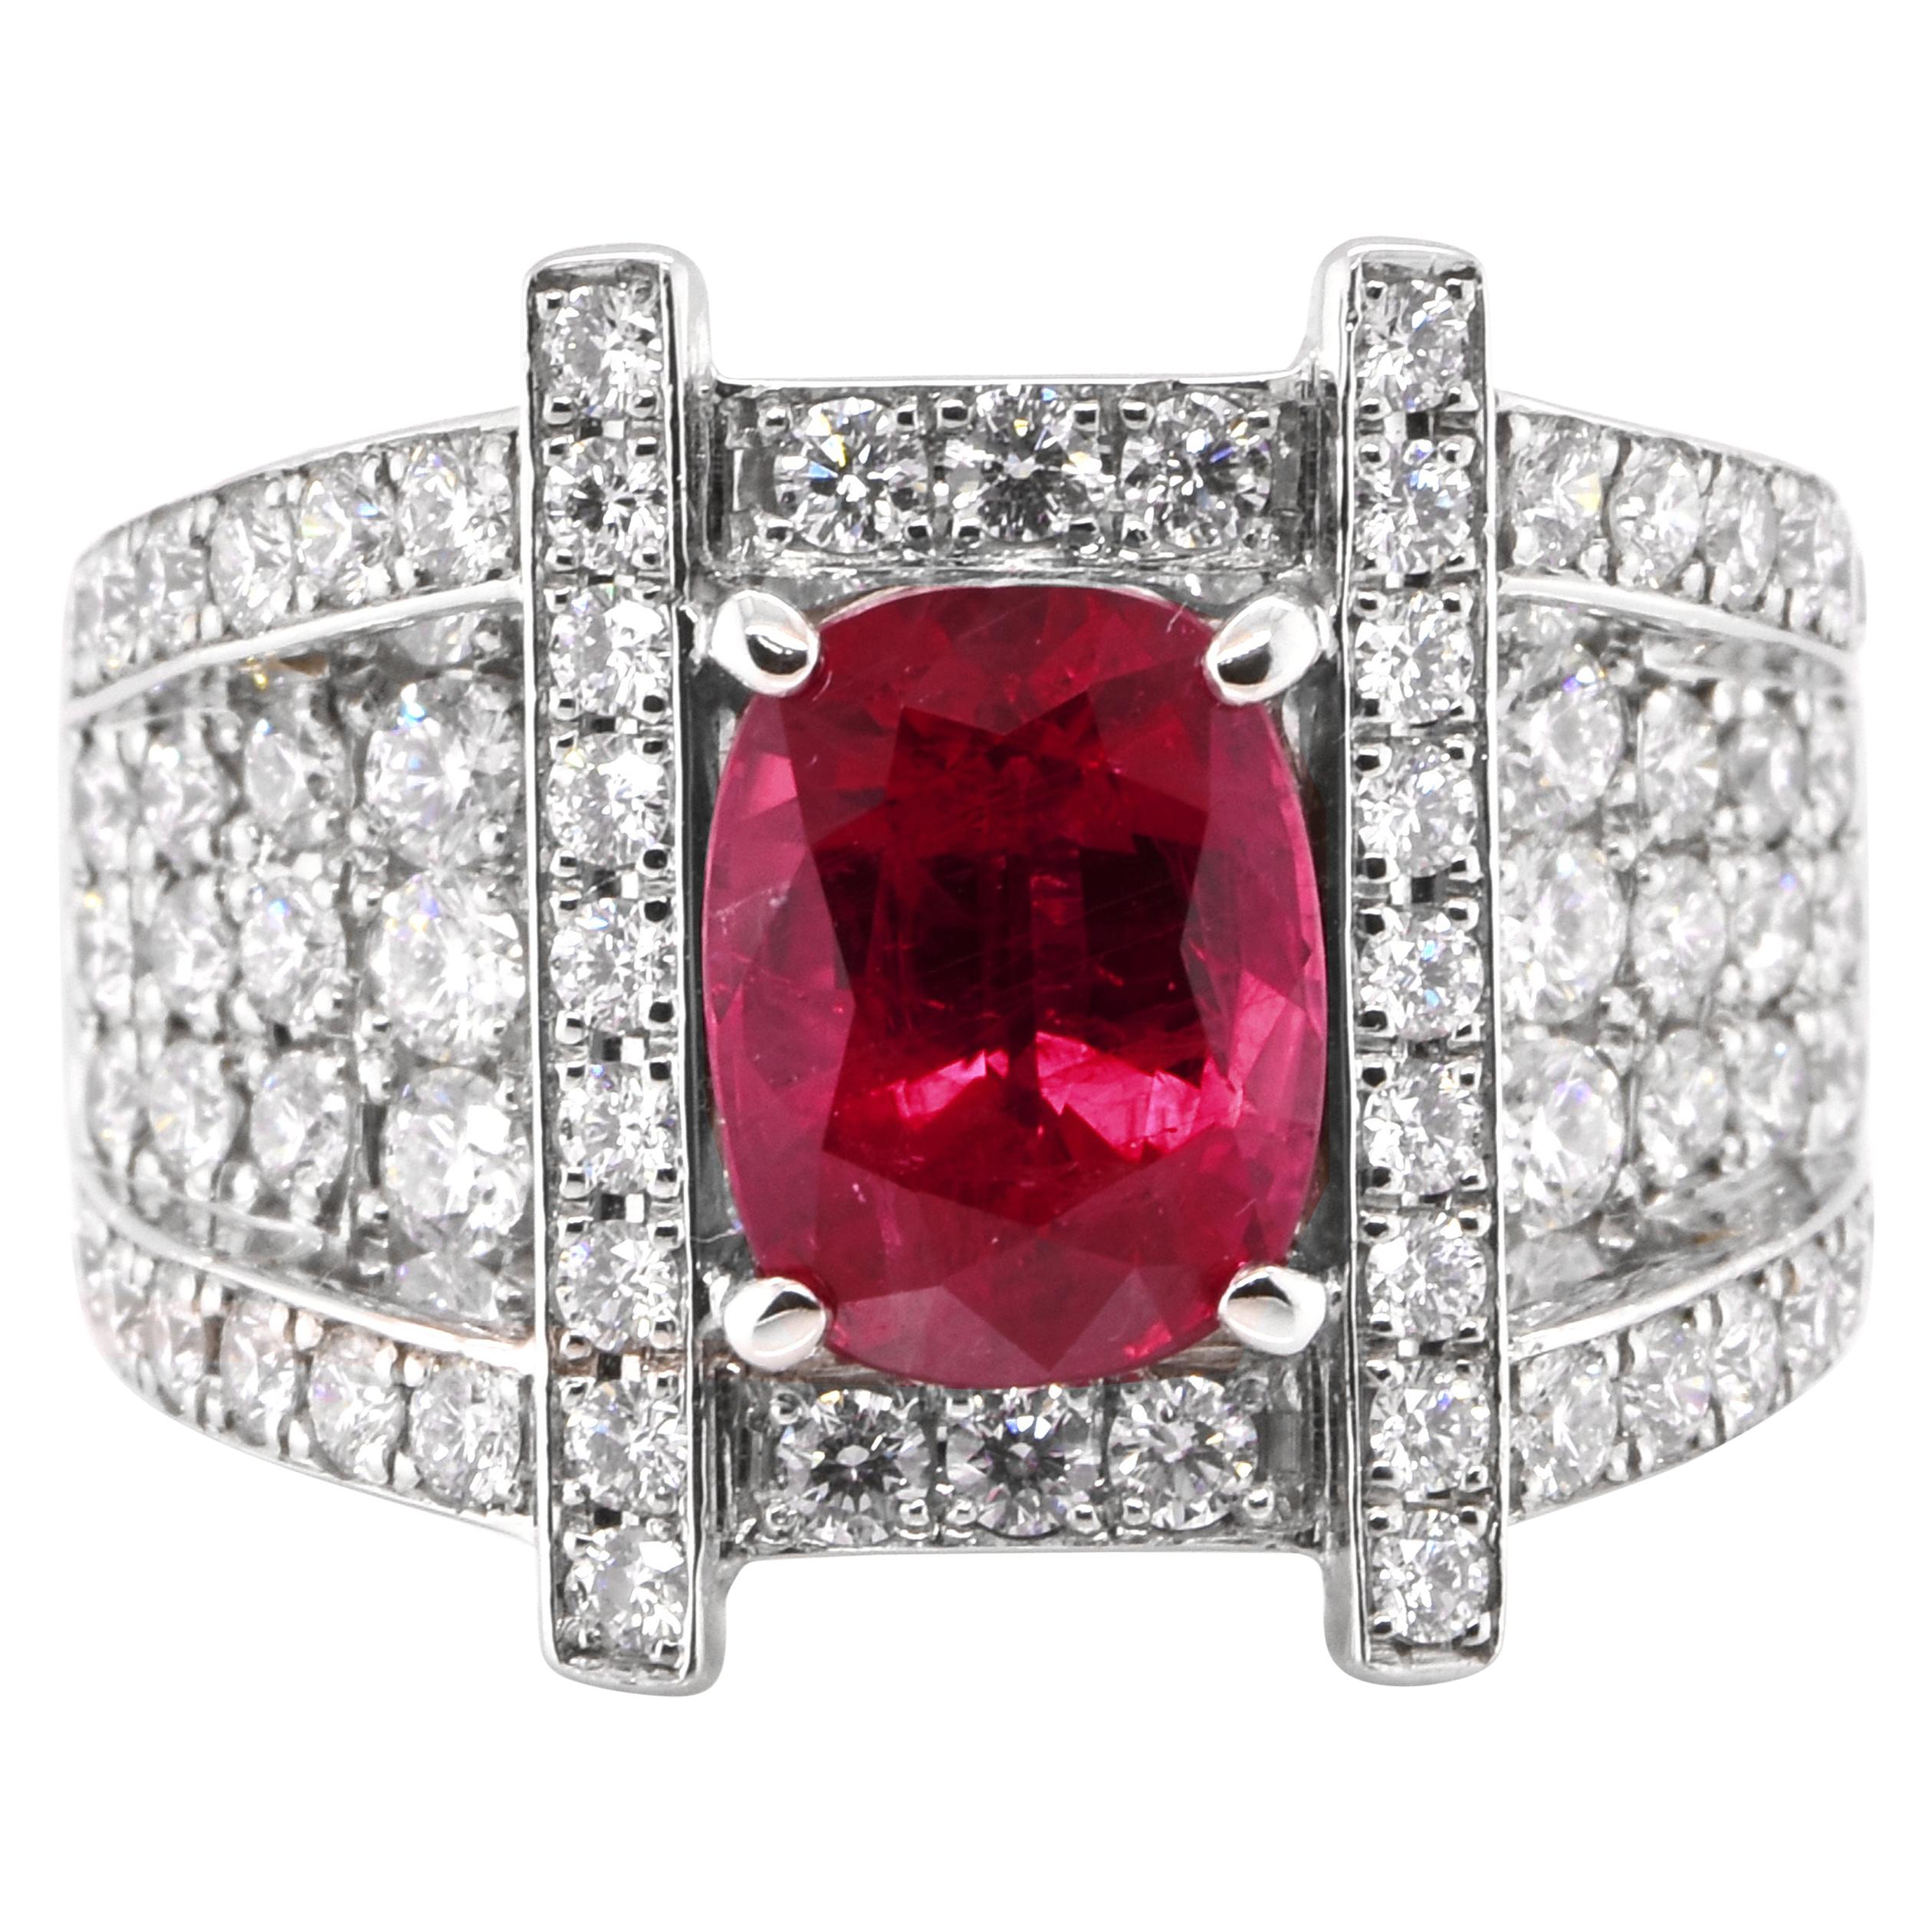 GIA Certified 3.18 Carat Natural Thailand Ruby and Diamond Ring Set in Platinum For Sale